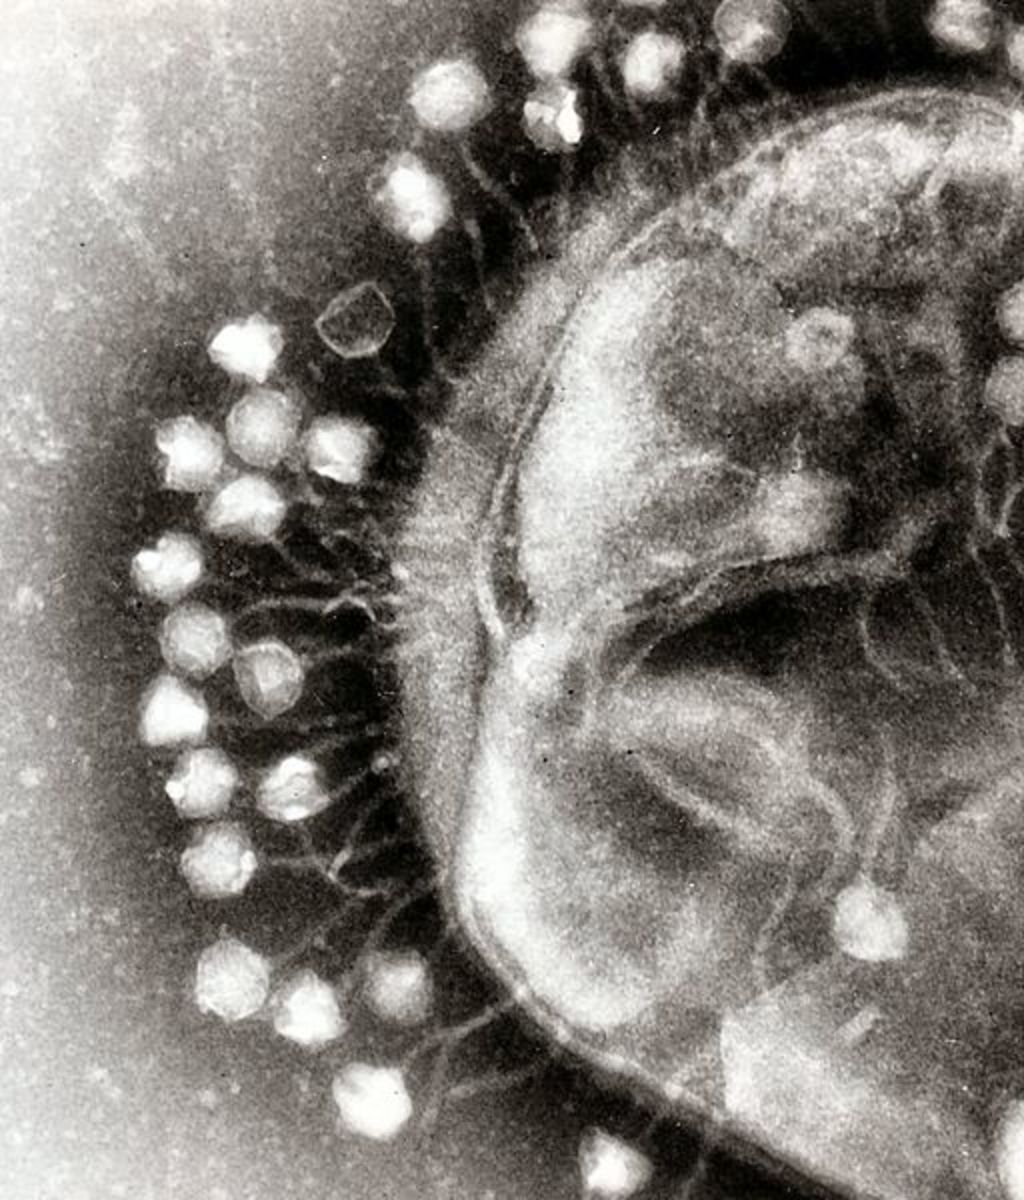 An electron micrograph of a swarm of bacteriophage particles.